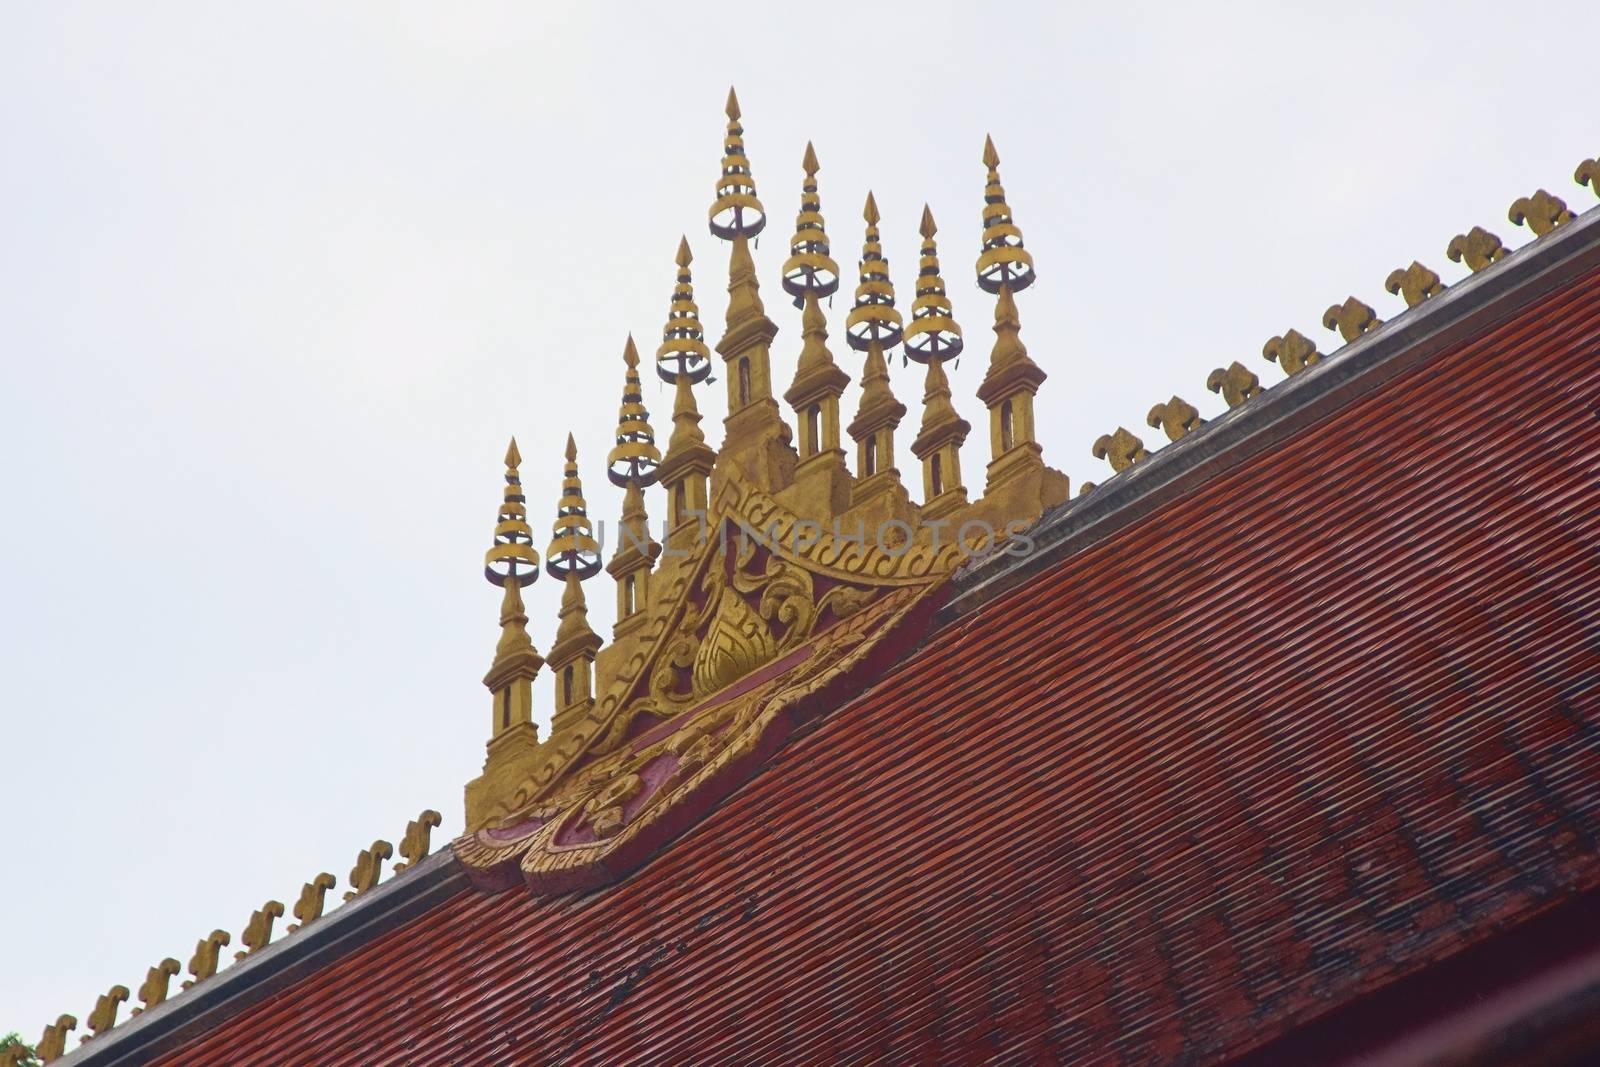 Gilded ornament representing stupas on the rooftop of a Buddhist temple in Luang Prabang, Laos. by hernan_hyper